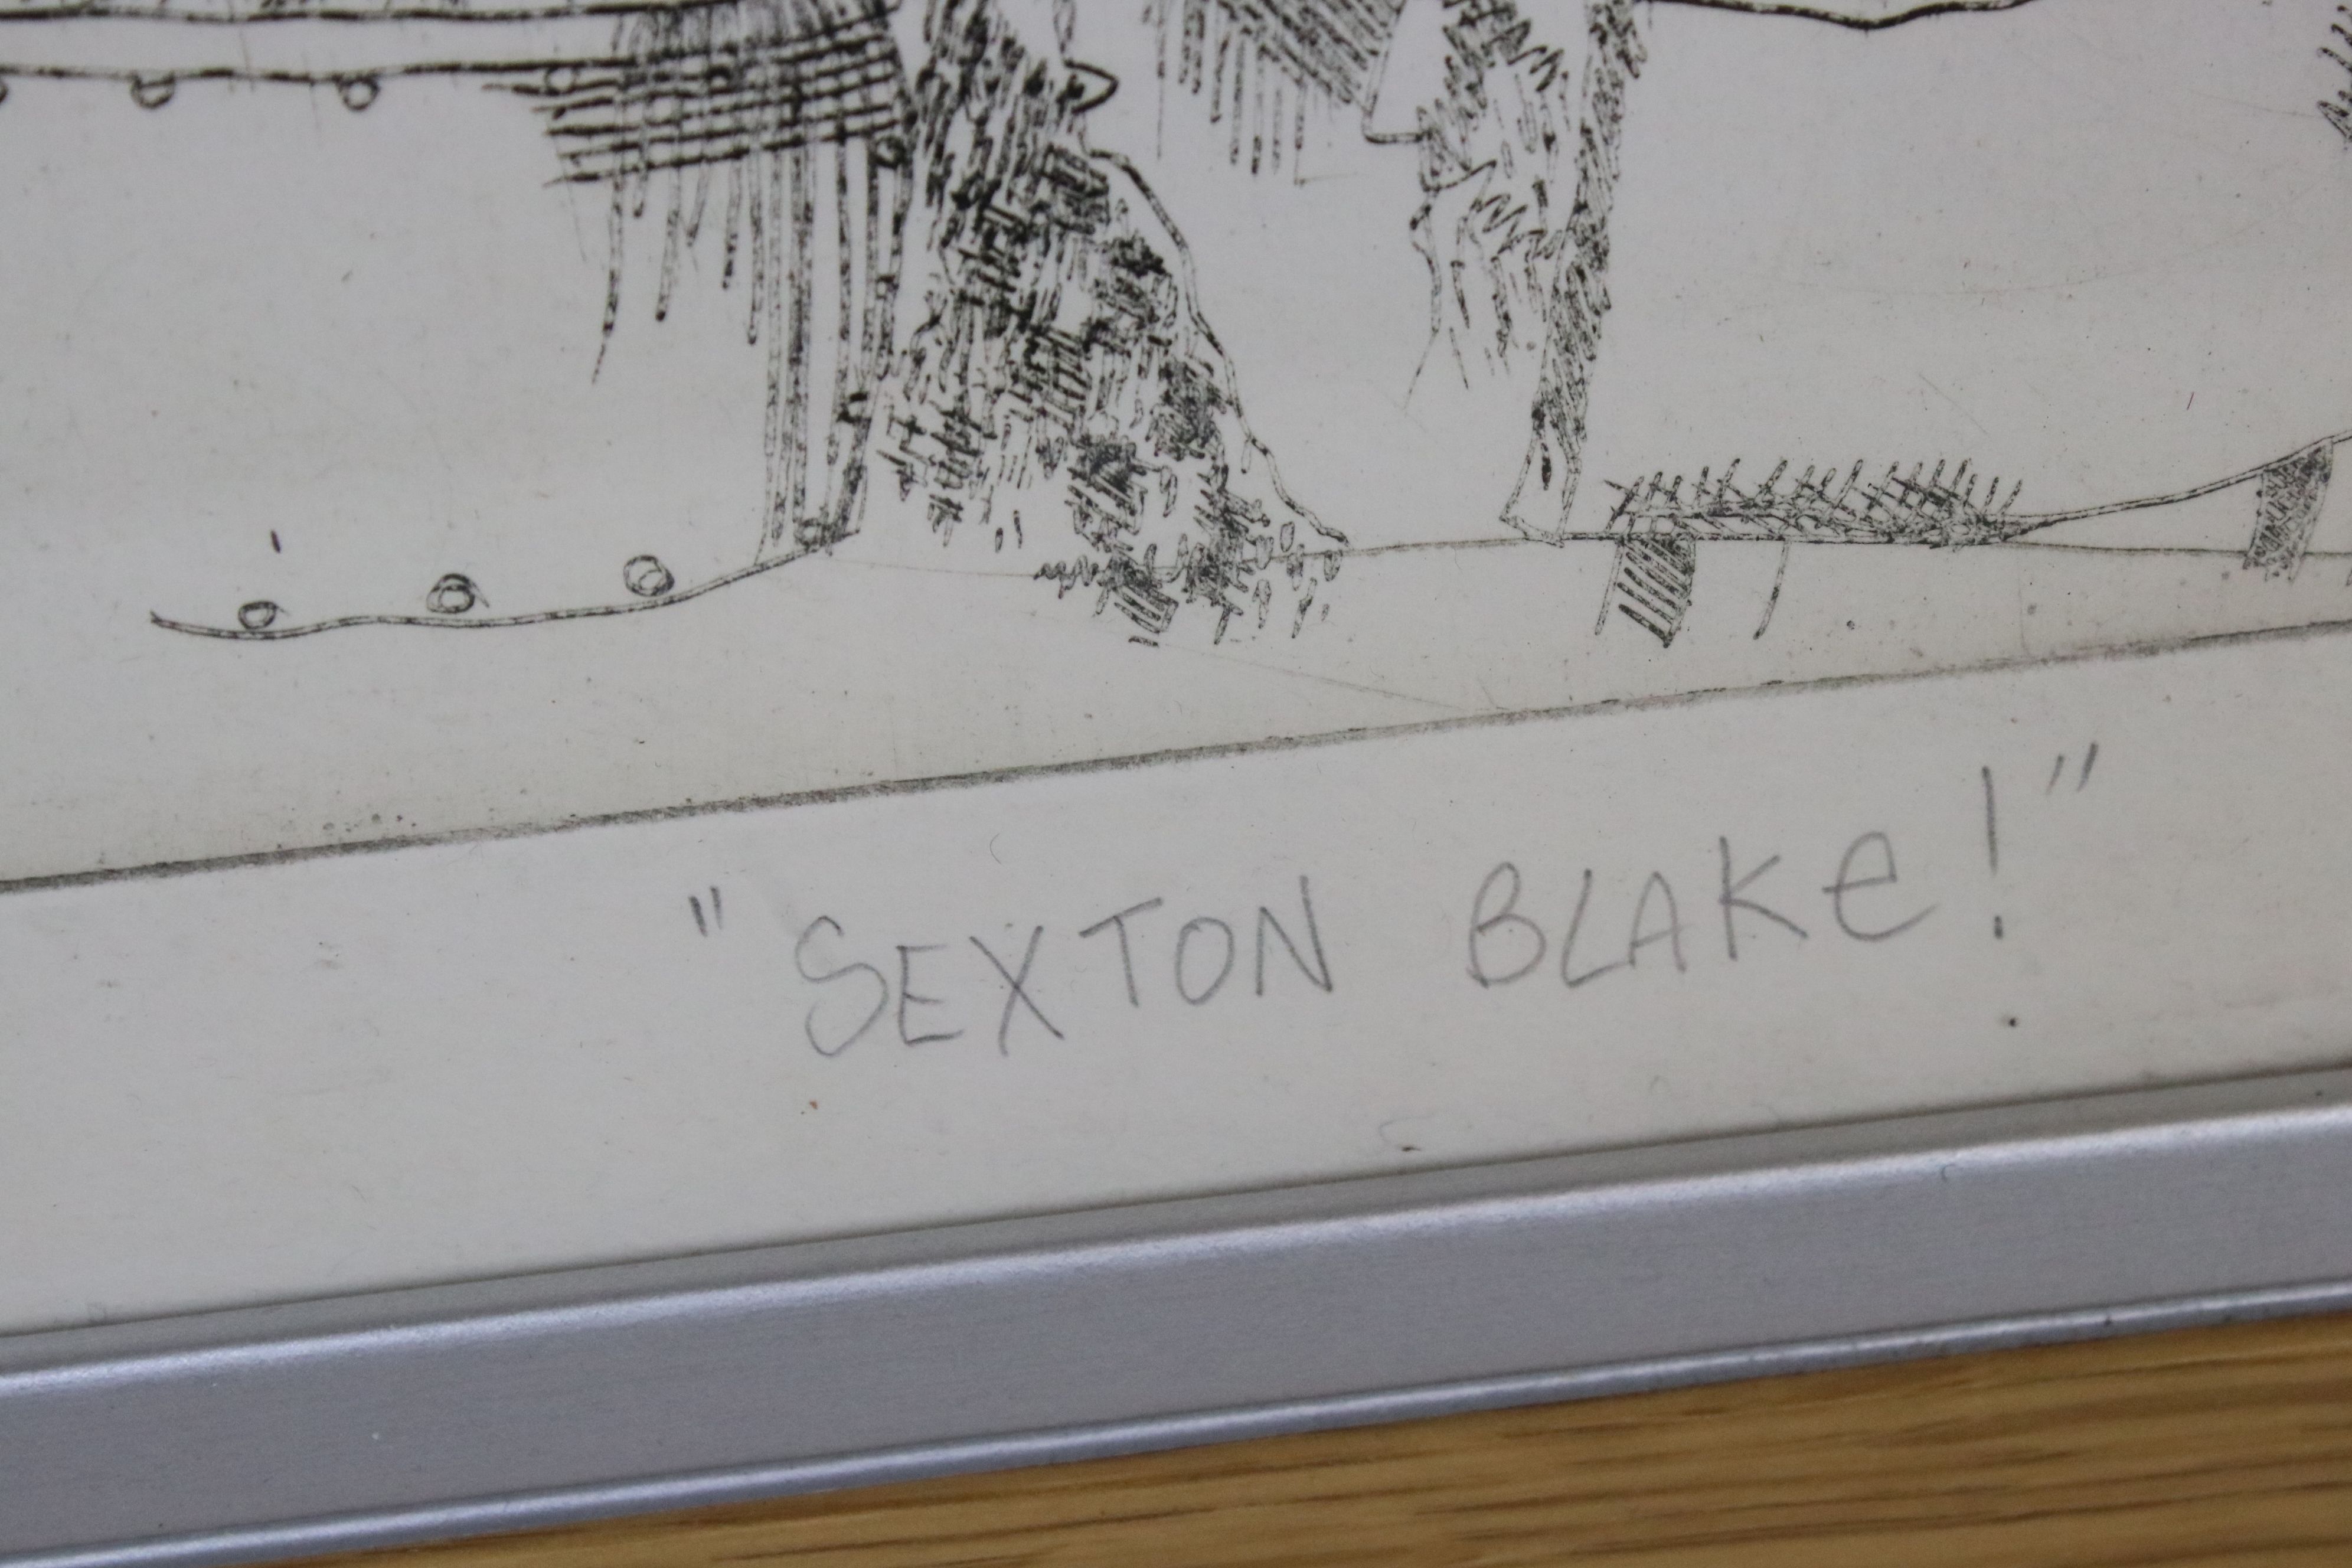 Tim Bulmer an artist proof etching of an Auction room picture sale entitled Sexton Blake, signed - Image 3 of 4